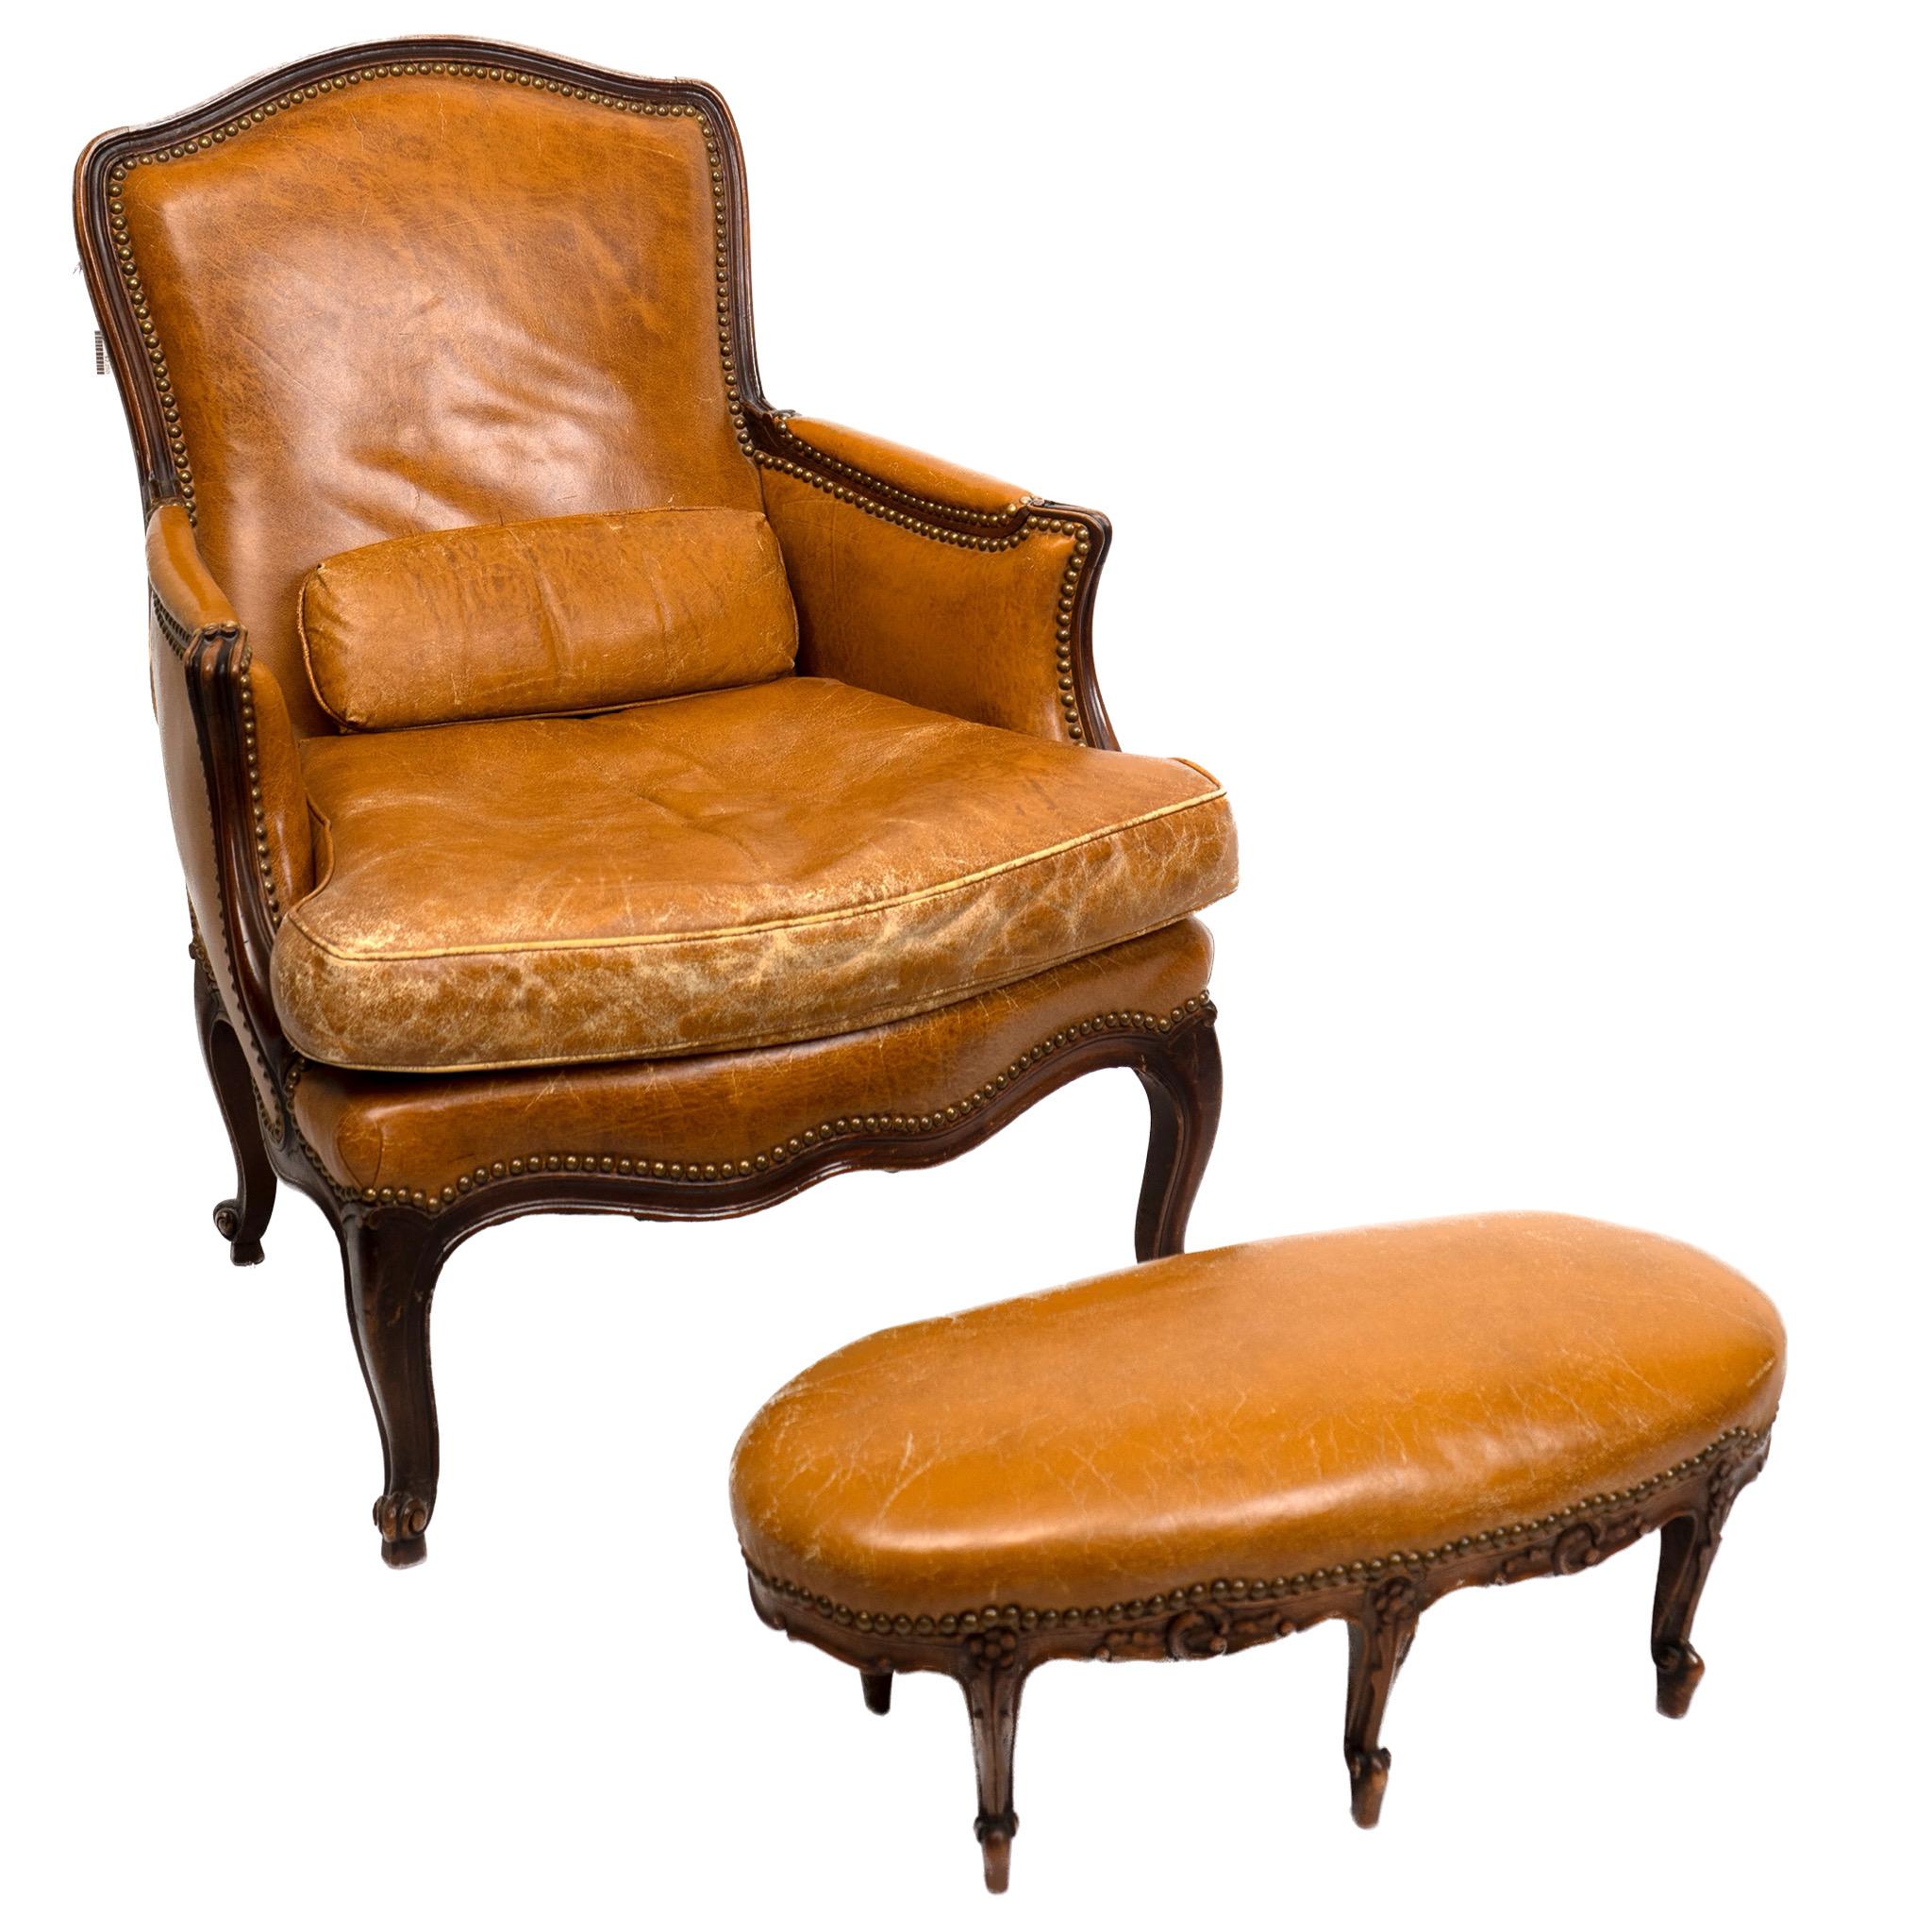 A late 19th century walnut bergere with shaped leather-padded back above a broad cushion seat raised on carved cabriole legs, the tabouret of oval form raised on similarly worked legs, both pieces detailed with upholstery finishing tacks.